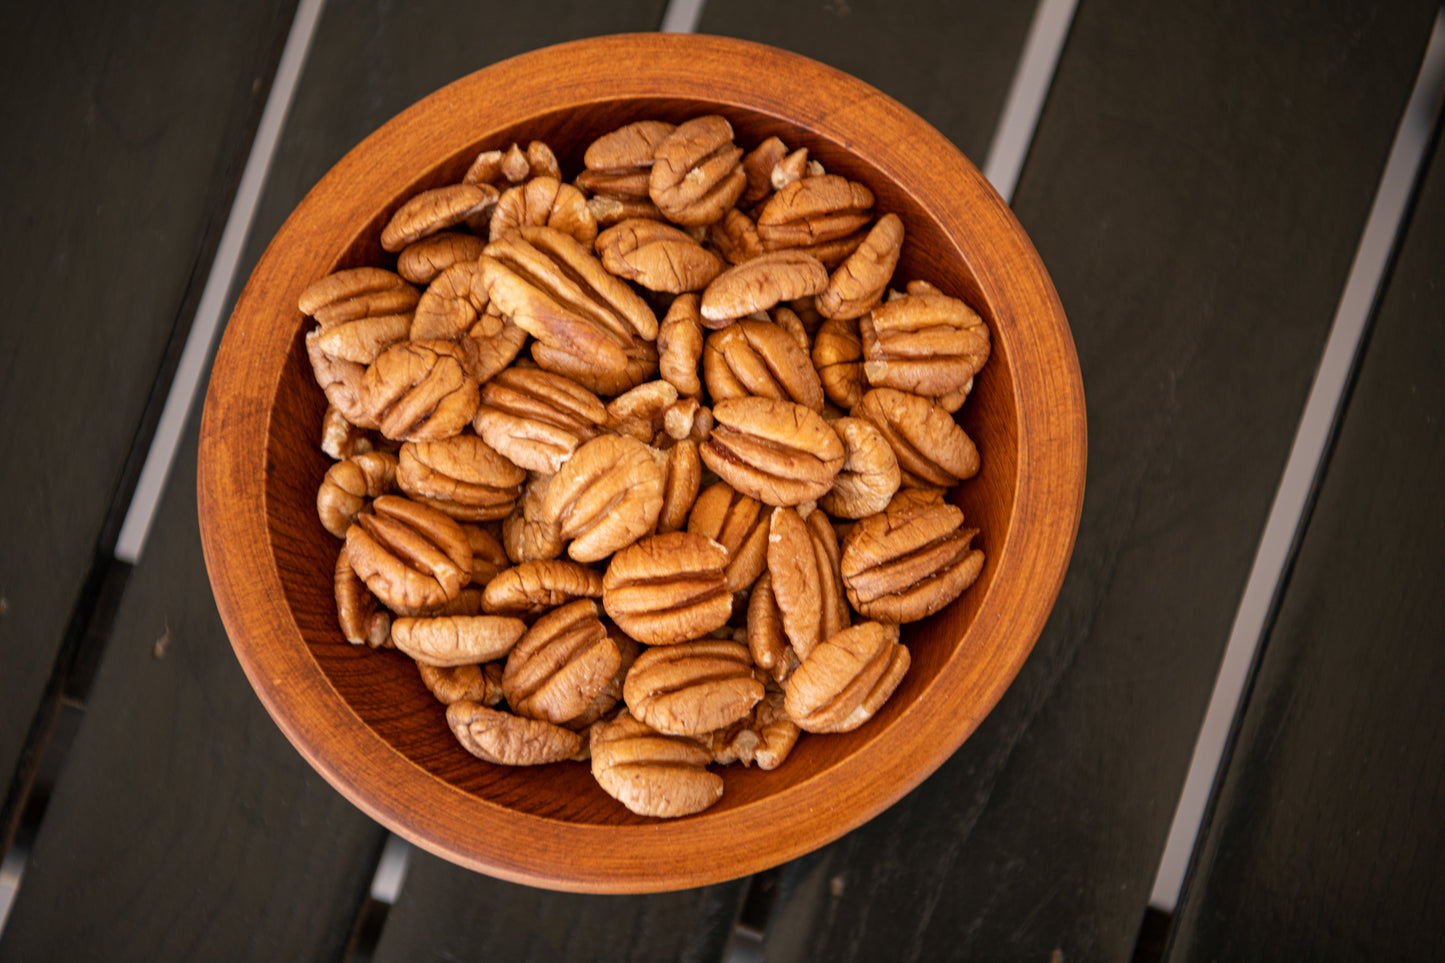 Try our Simply Toasted Pecans